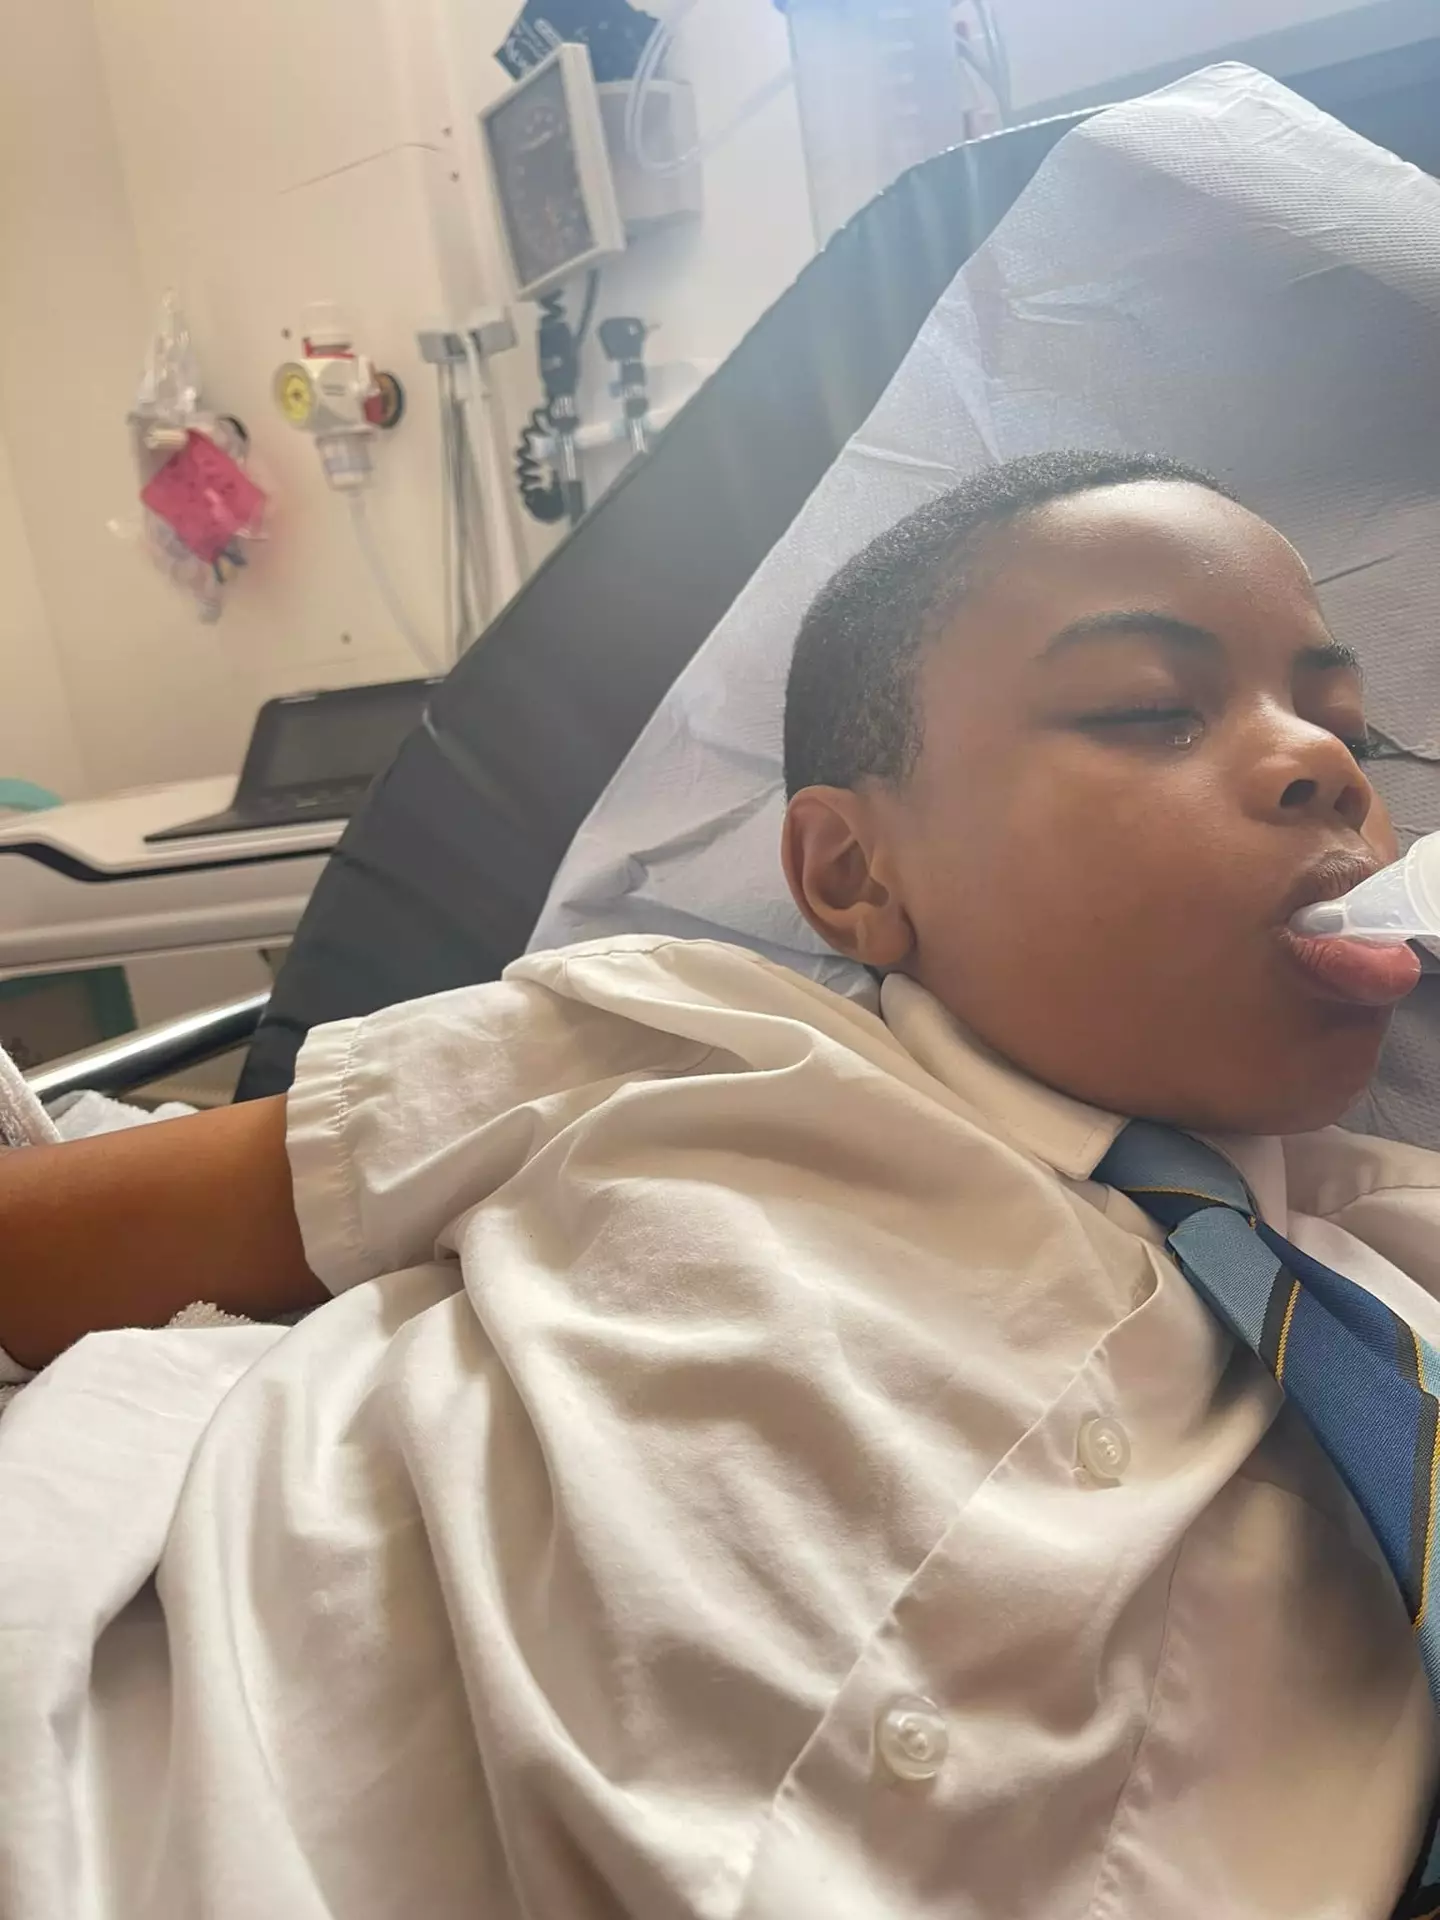 Raheem lost his finger as a result of trying to escape school after being bullied.